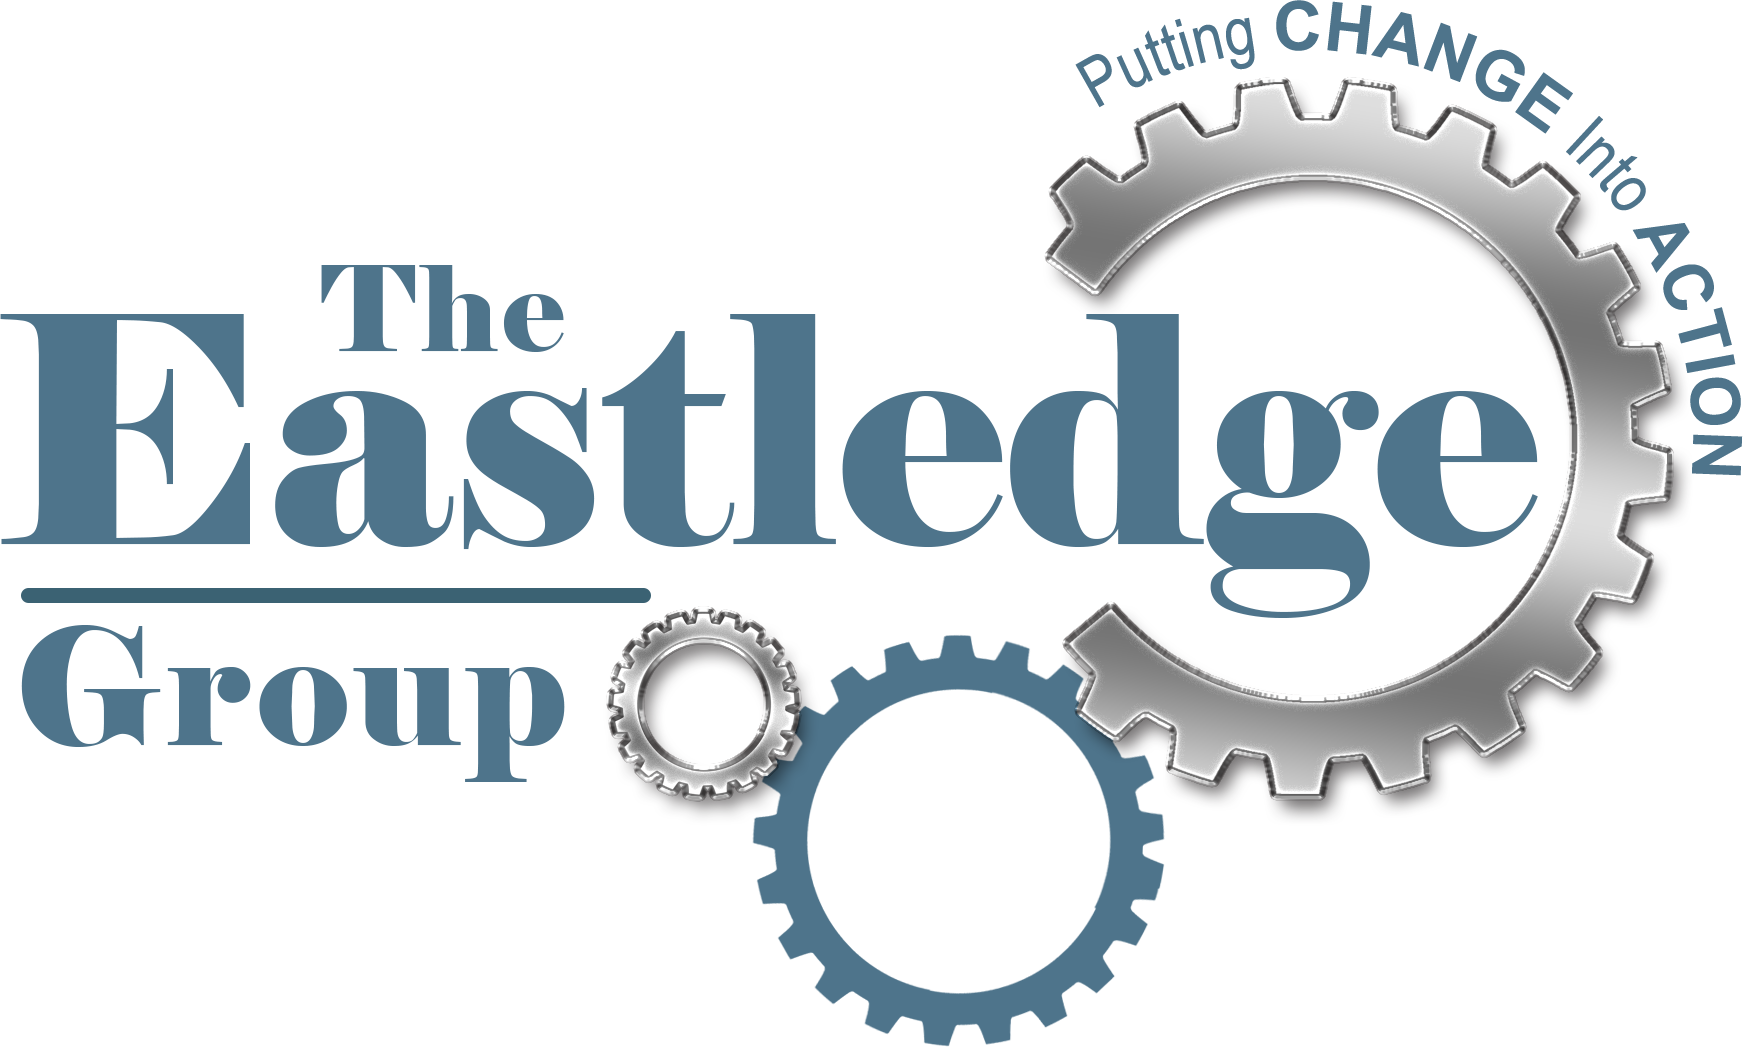 The Eastledge Group